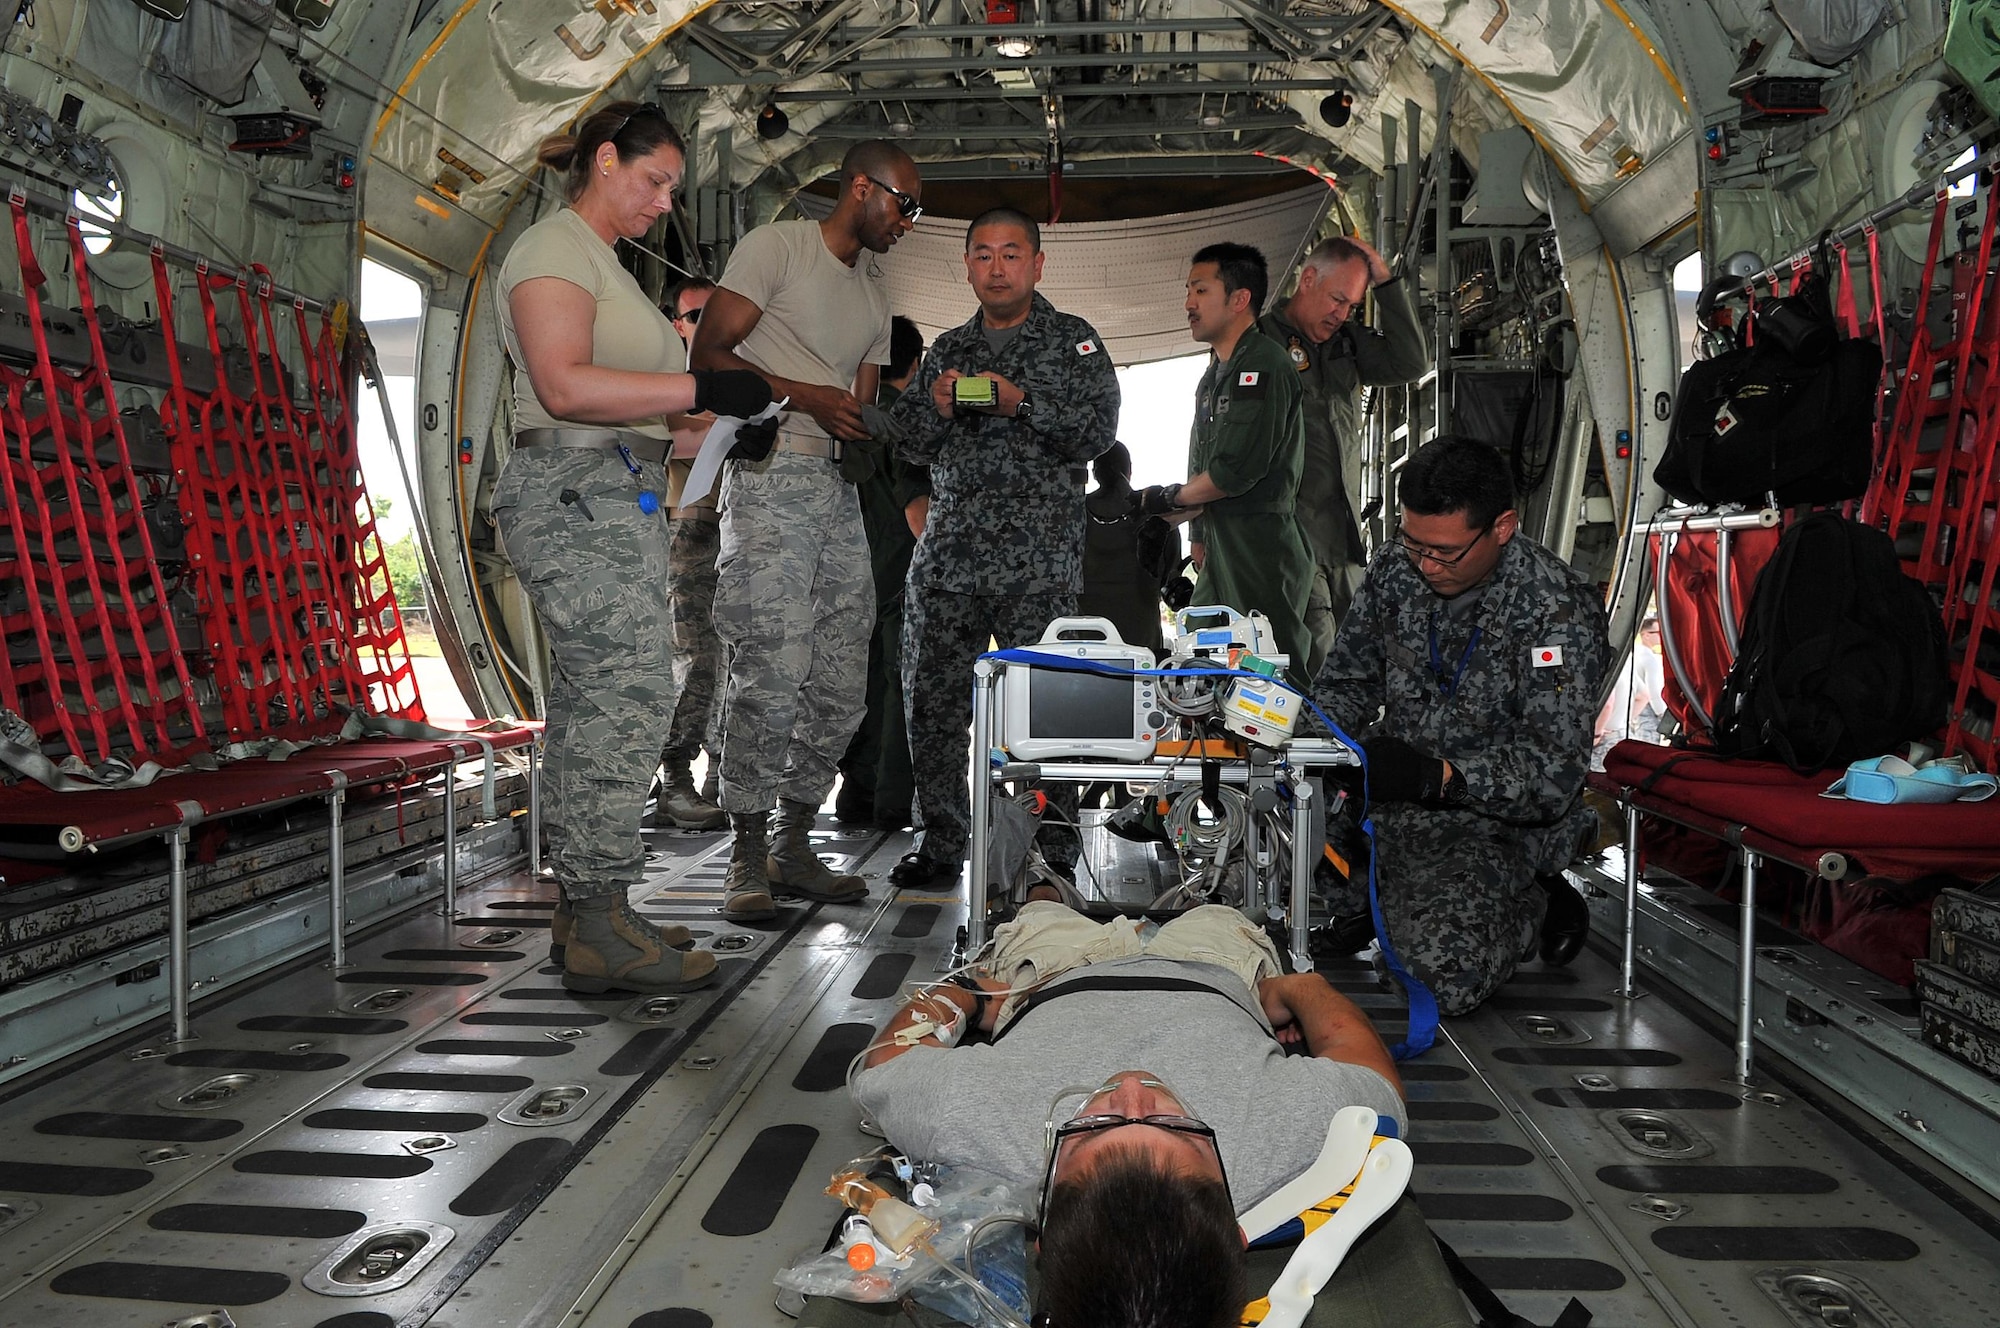 Airmen transfer a simulated critical care patient to a Japan Air Self-Defense Force aeromedical evacuation team Feb. 16, 2015, during exercise Cope North 15 at Sinapalo, Rota. The exercise enhances humanitarian assistance and disaster relief crisis response capabilities between six nations and lays the foundation for regional cooperation expansion during real-world contingencies in the Asia-Pacific Region. (U.S. Air Force photo/Tech. Sgt. Jason Robertson)